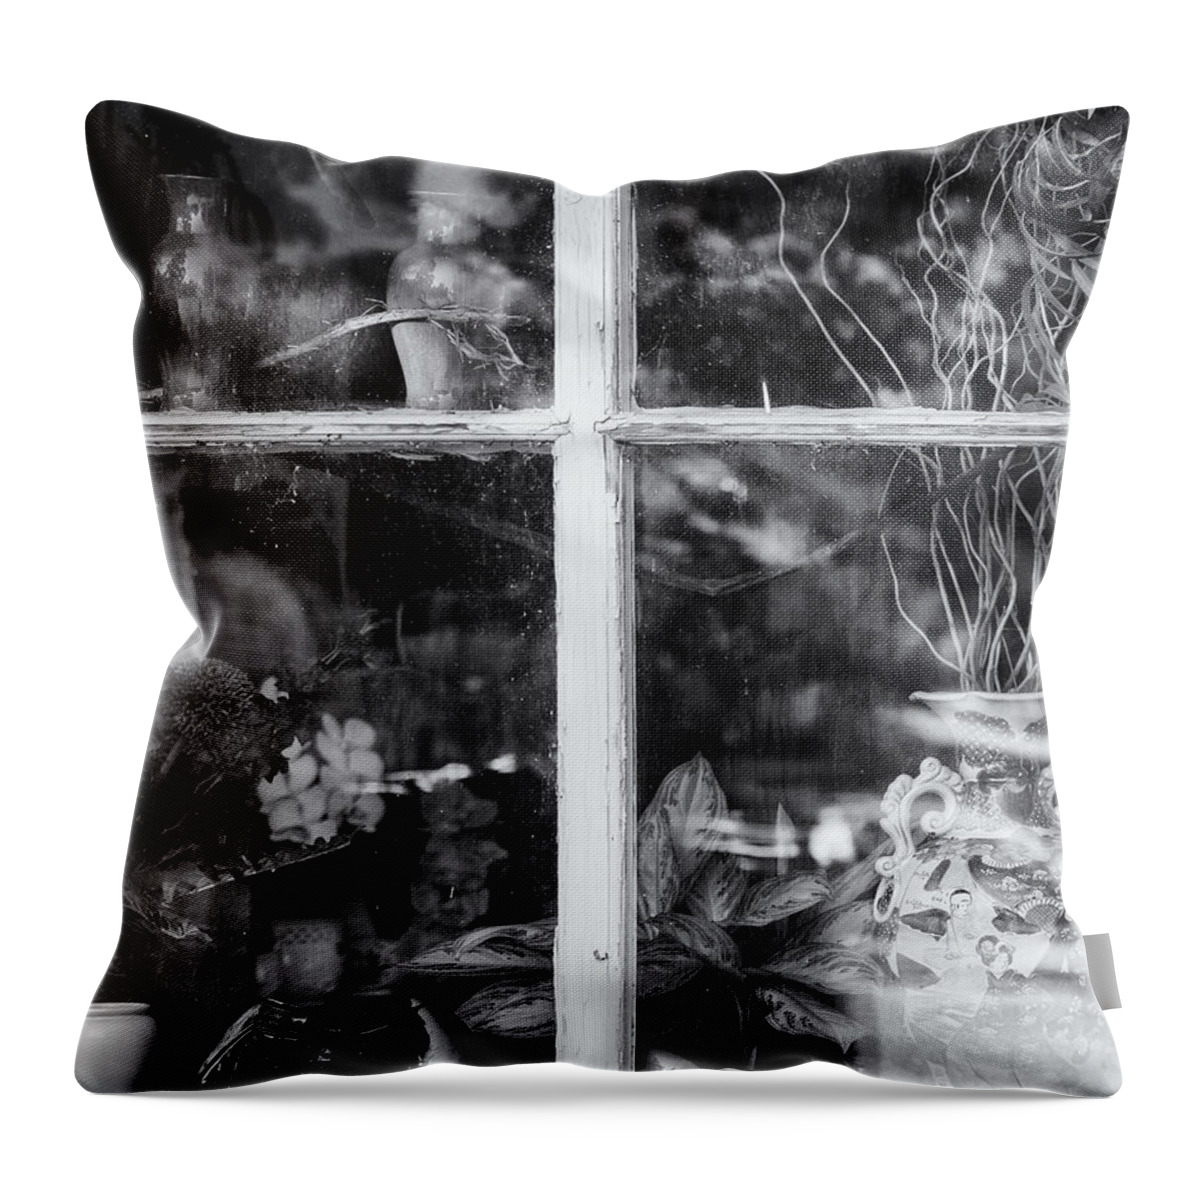 Brattleboro Vermont Throw Pillow featuring the photograph Window In Black and White by Tom Singleton